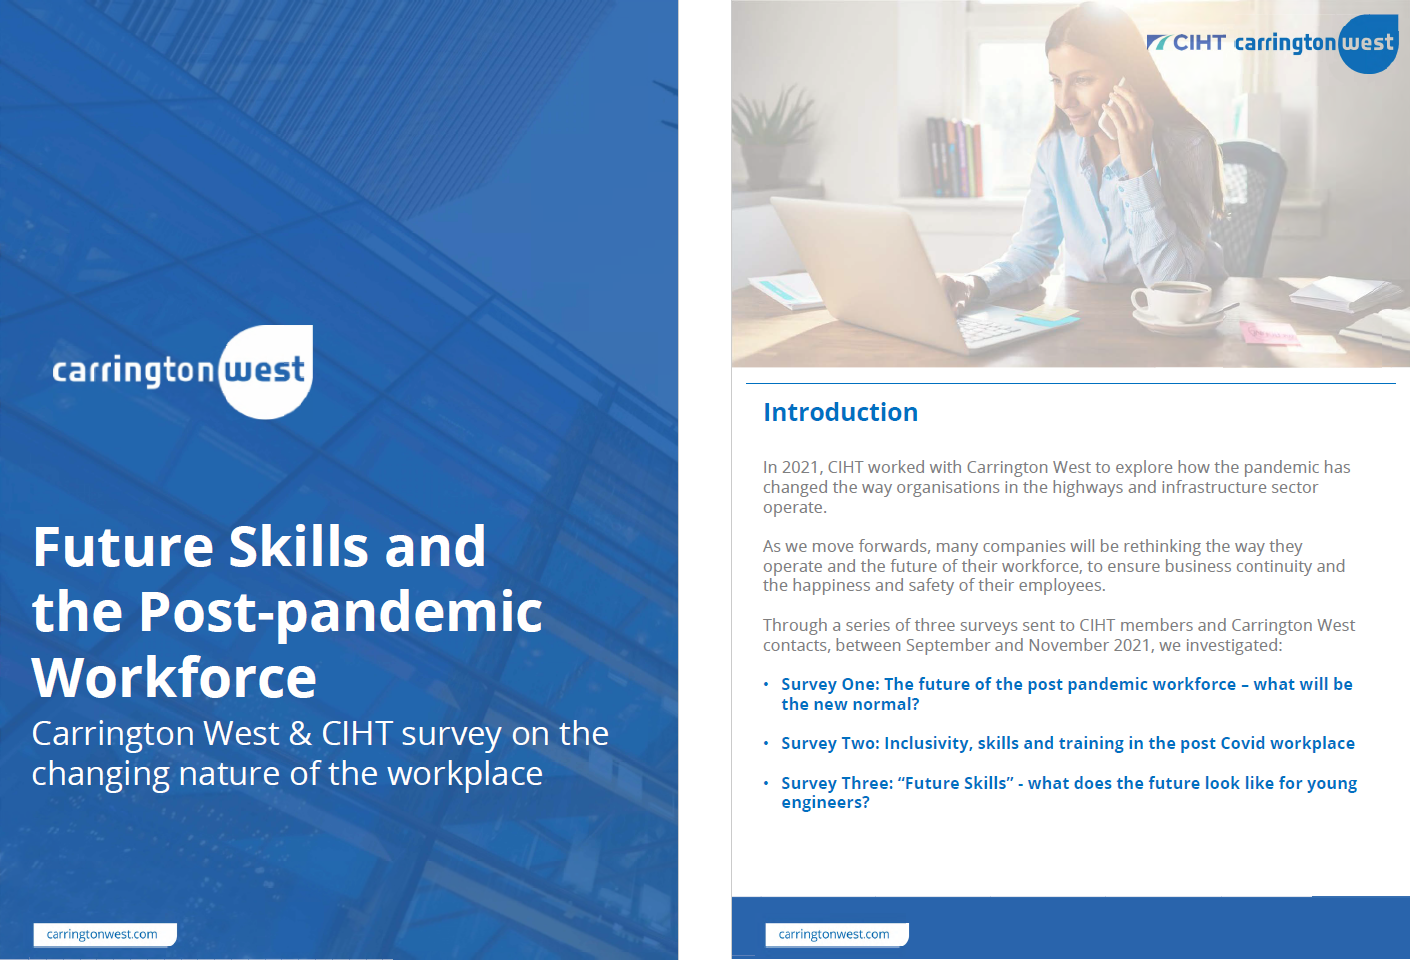 Future Skills and the Post-pandemic workforce survey results report